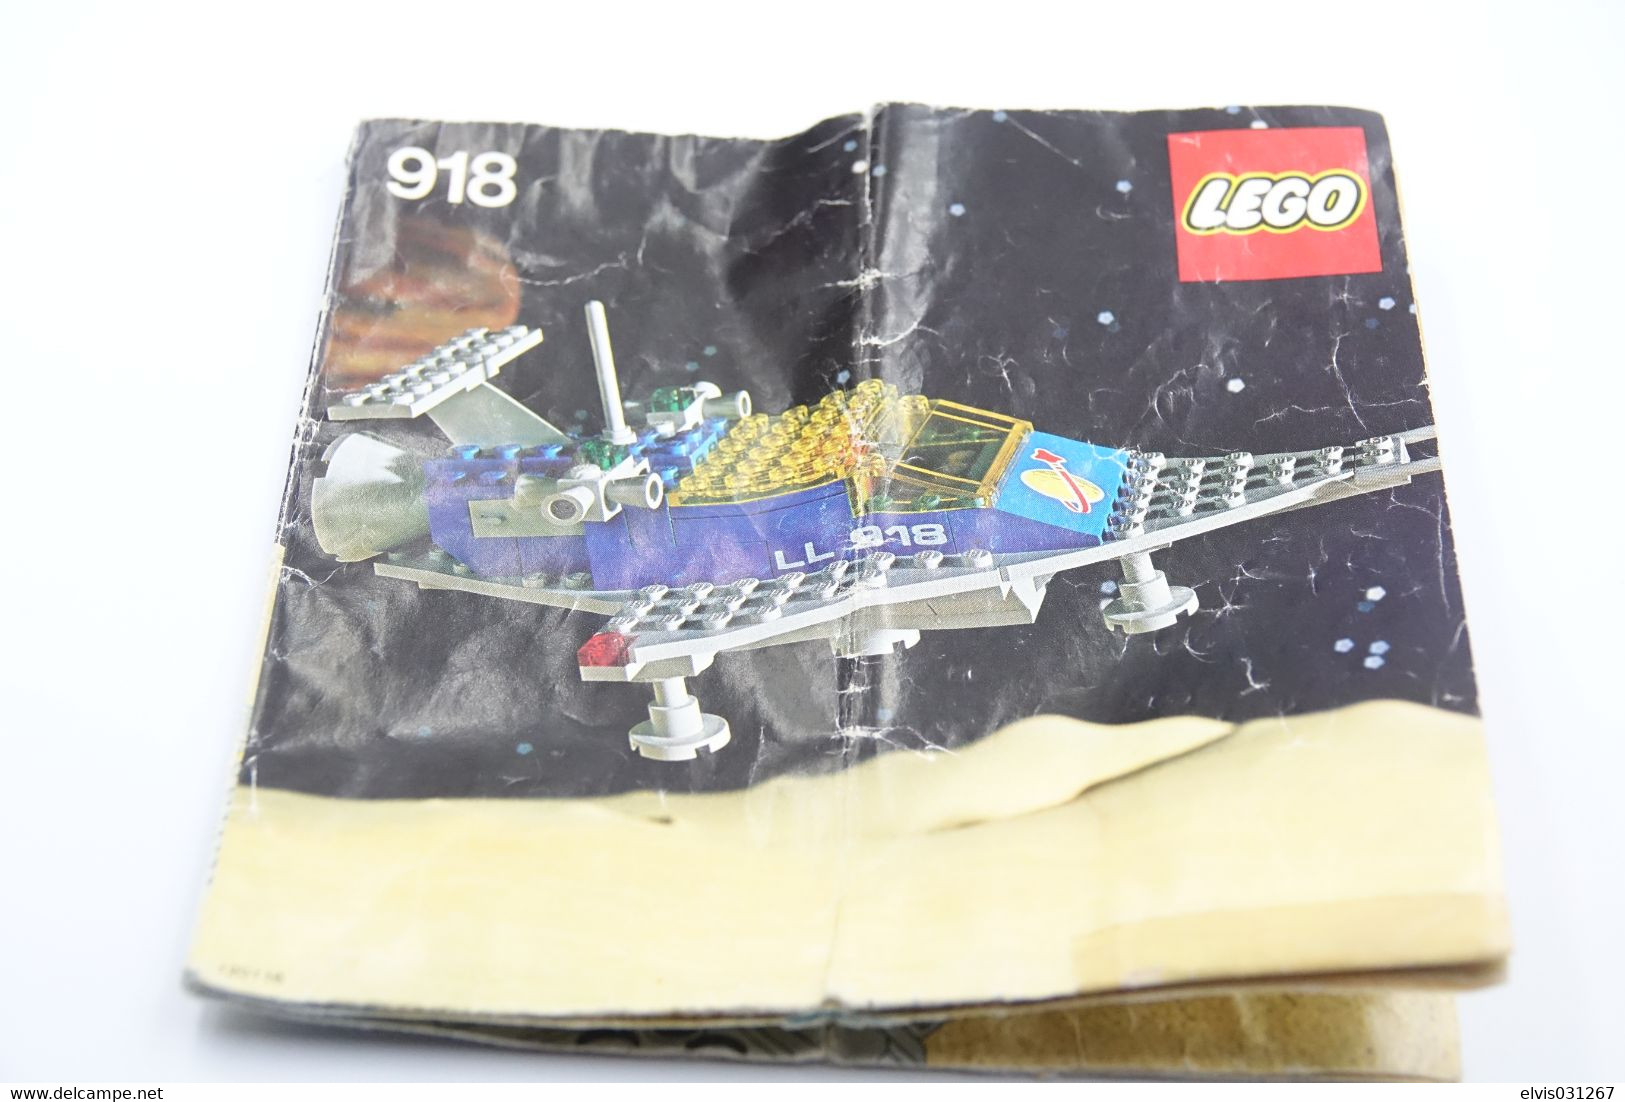 LEGO - 918 Space Transport Box And Instruction Manual - Original Lego 1979 - Vintage - Catalogues